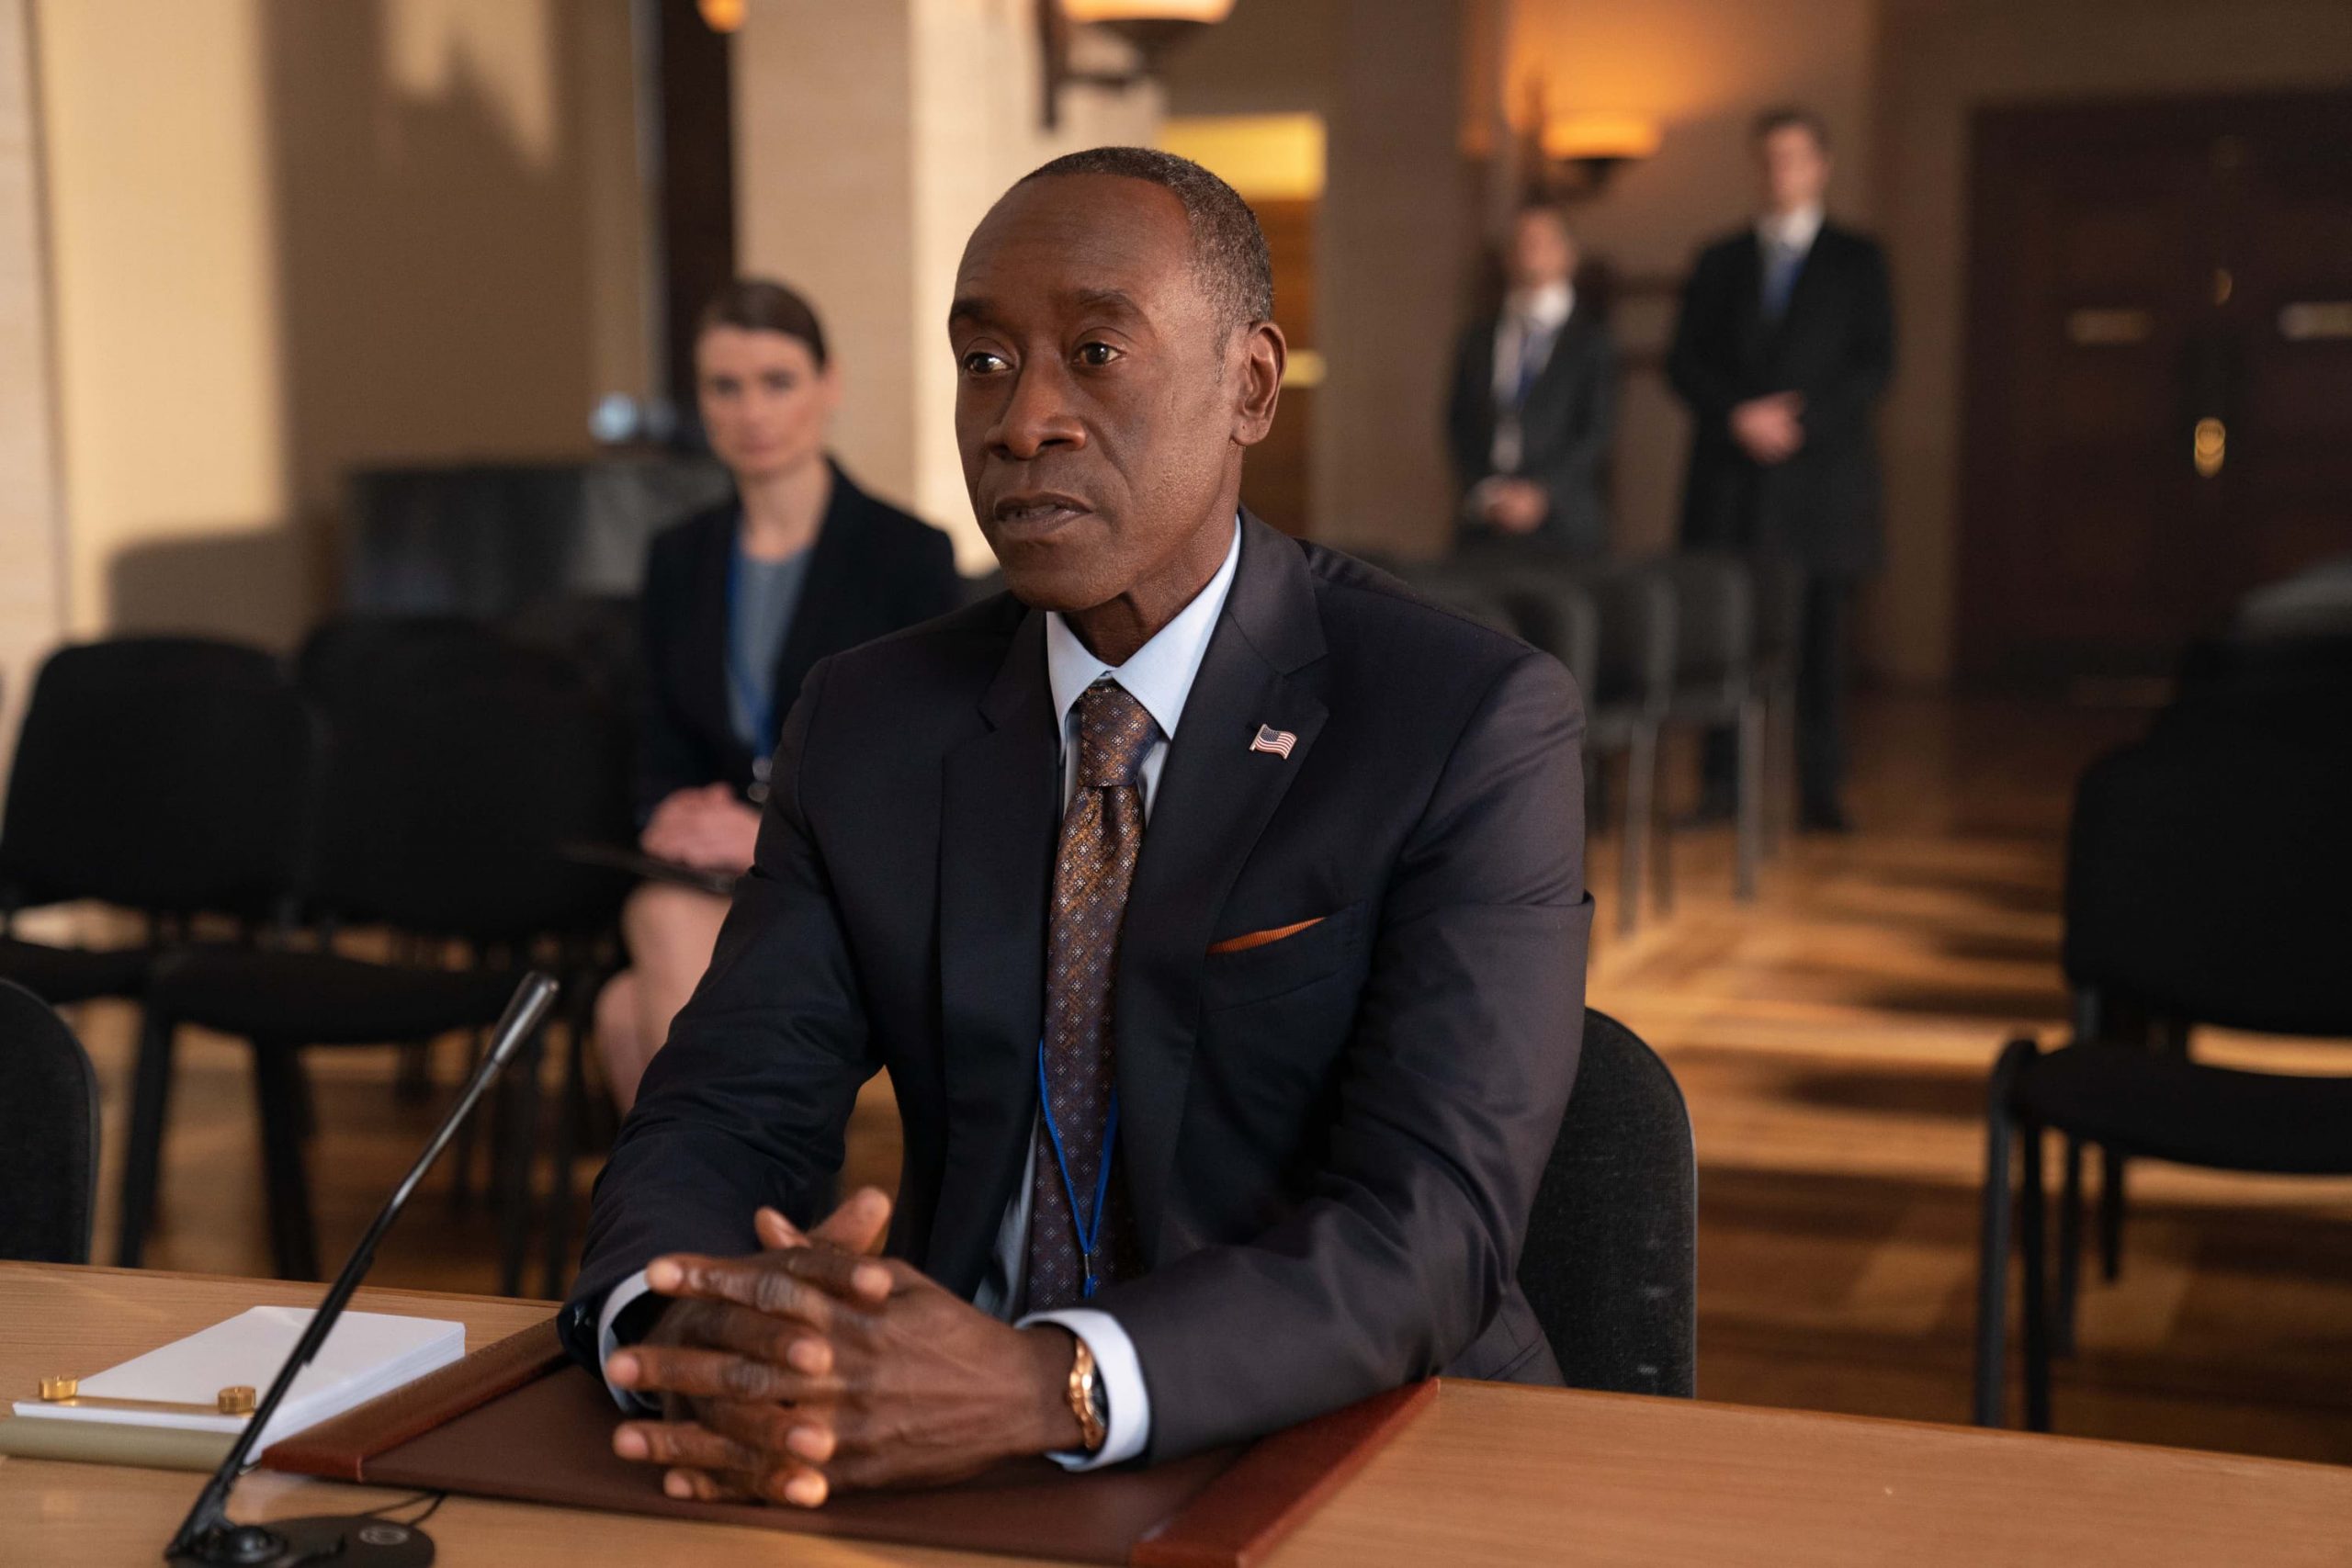 Don Cheadle as Rhodey in Marvel Studios' SECRET INVASION, exclusively on Disney+. Photo by Gareth Gatrell. © 2023 MARVEL.